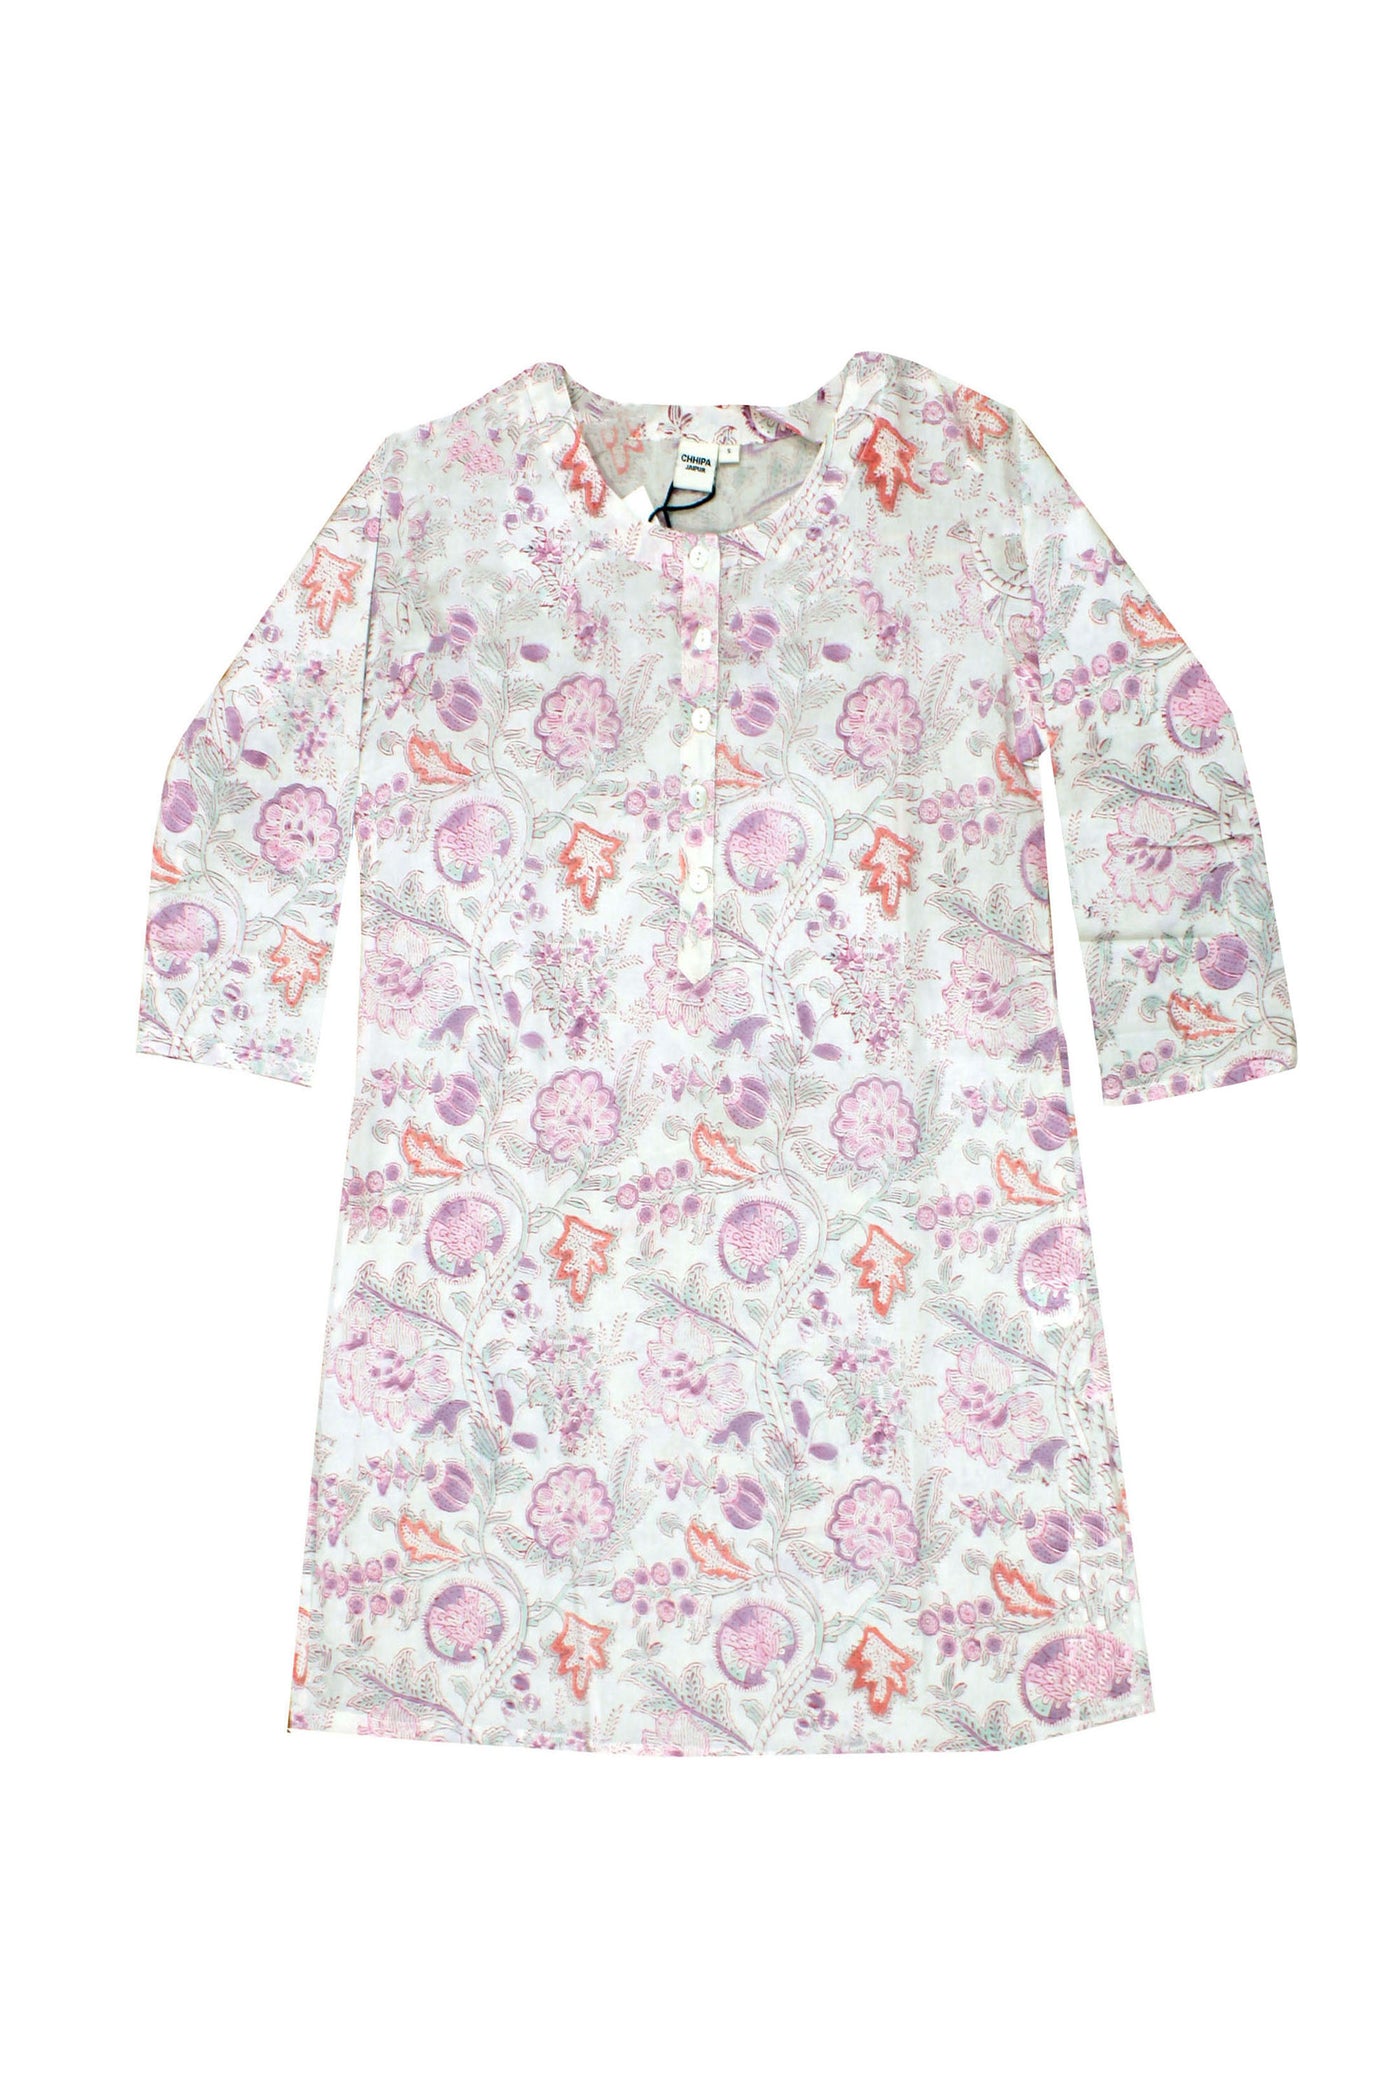 Cotton Floral Jaal Print Tunic in Off White